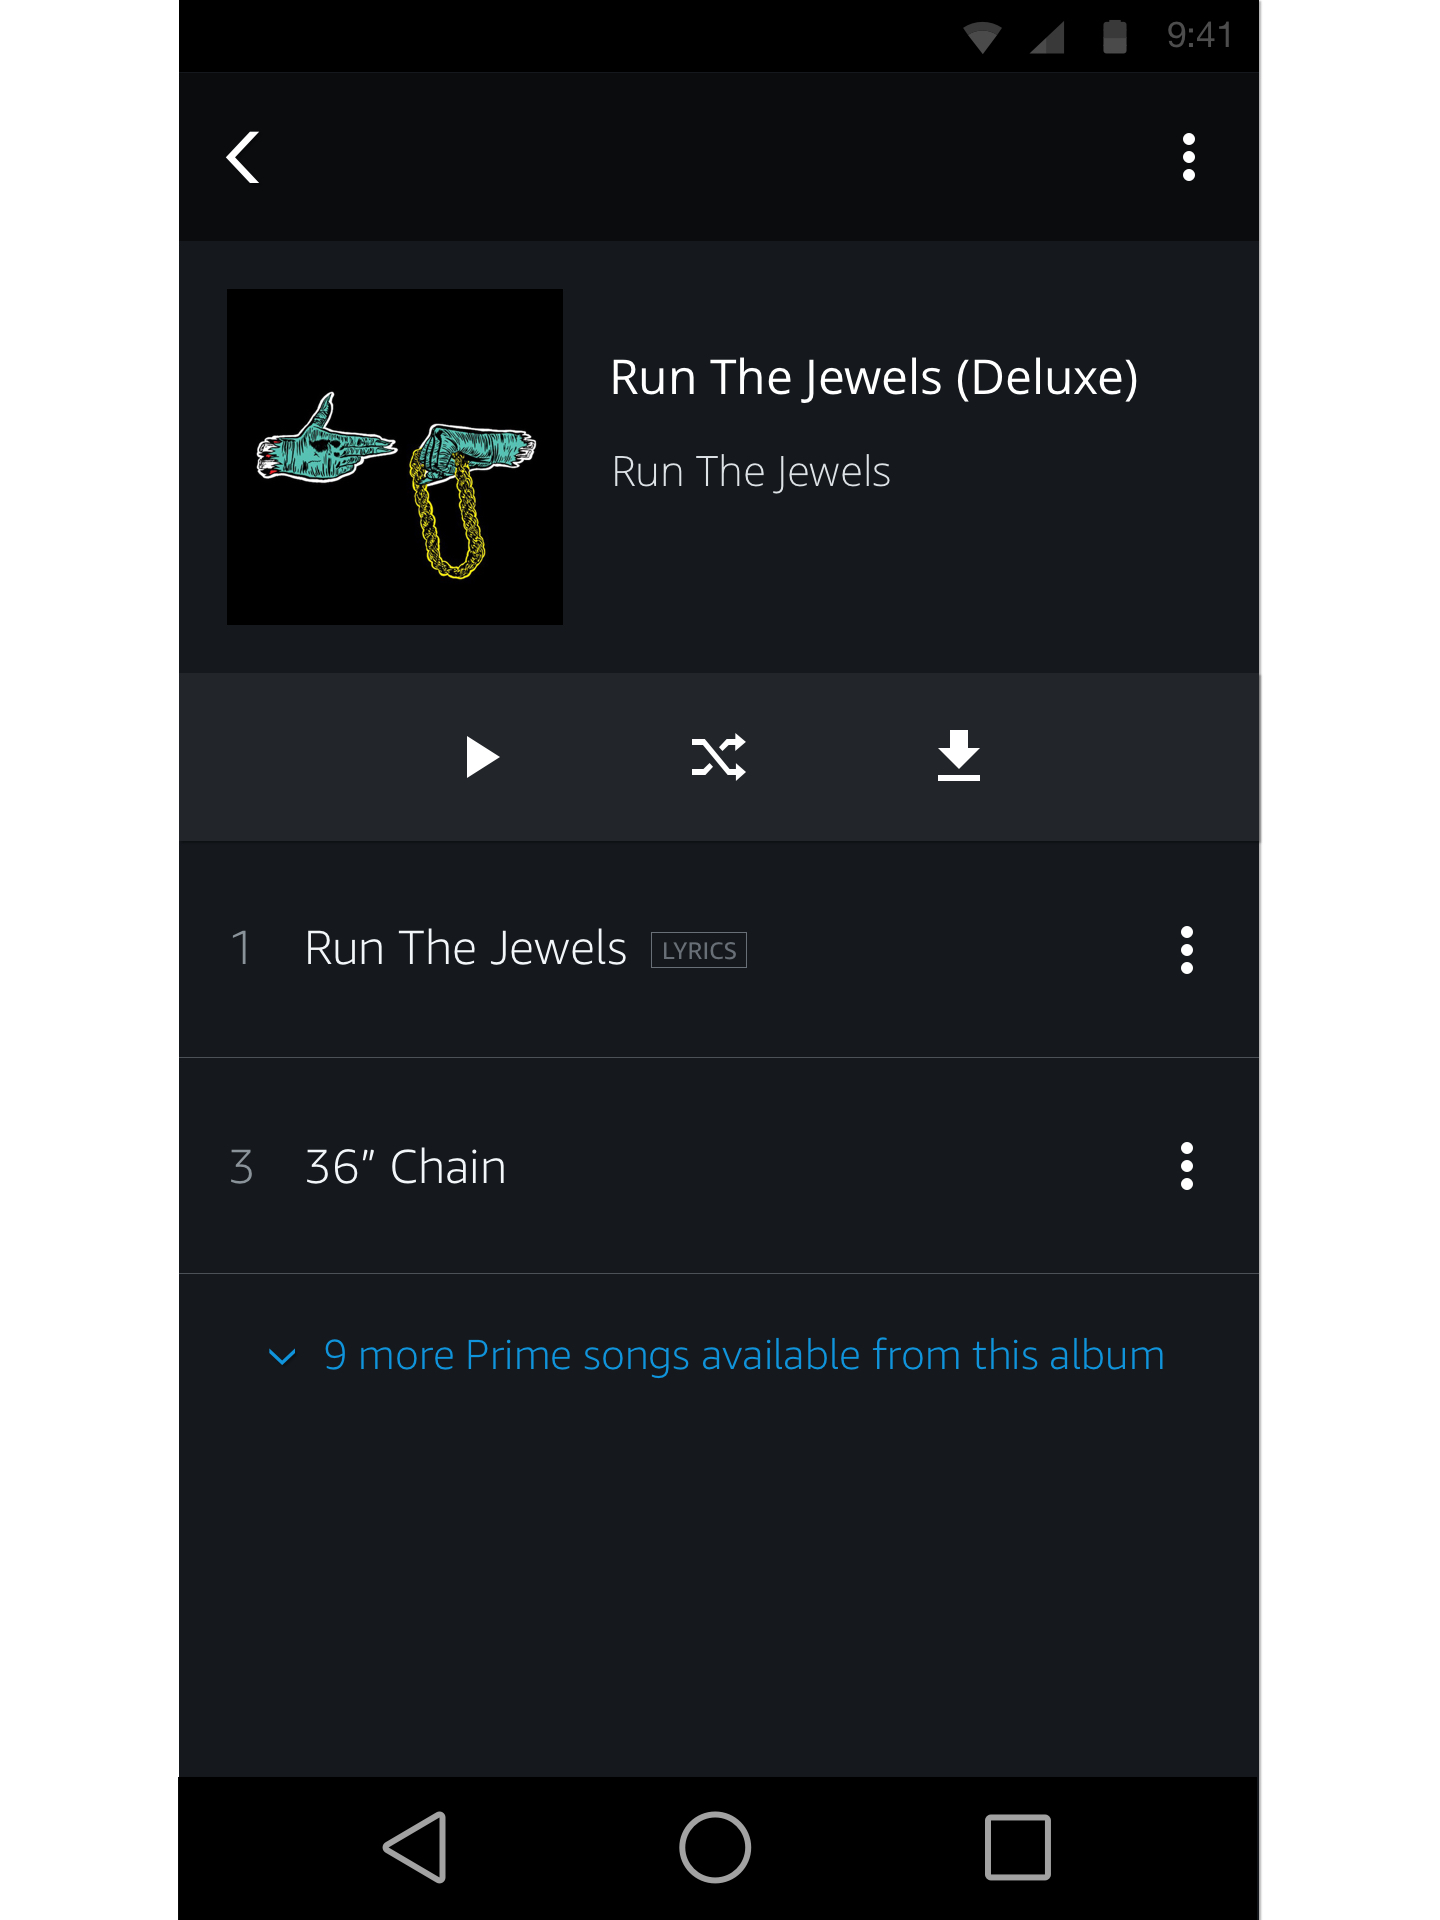 An Album Detail page showing the album 'Run the Jewels' by the artist Run the Jewels. The screen shows a play, shuffle and download button and also 2 songs from the album. There is also a link that says '9 more Prime songs available from this album'.